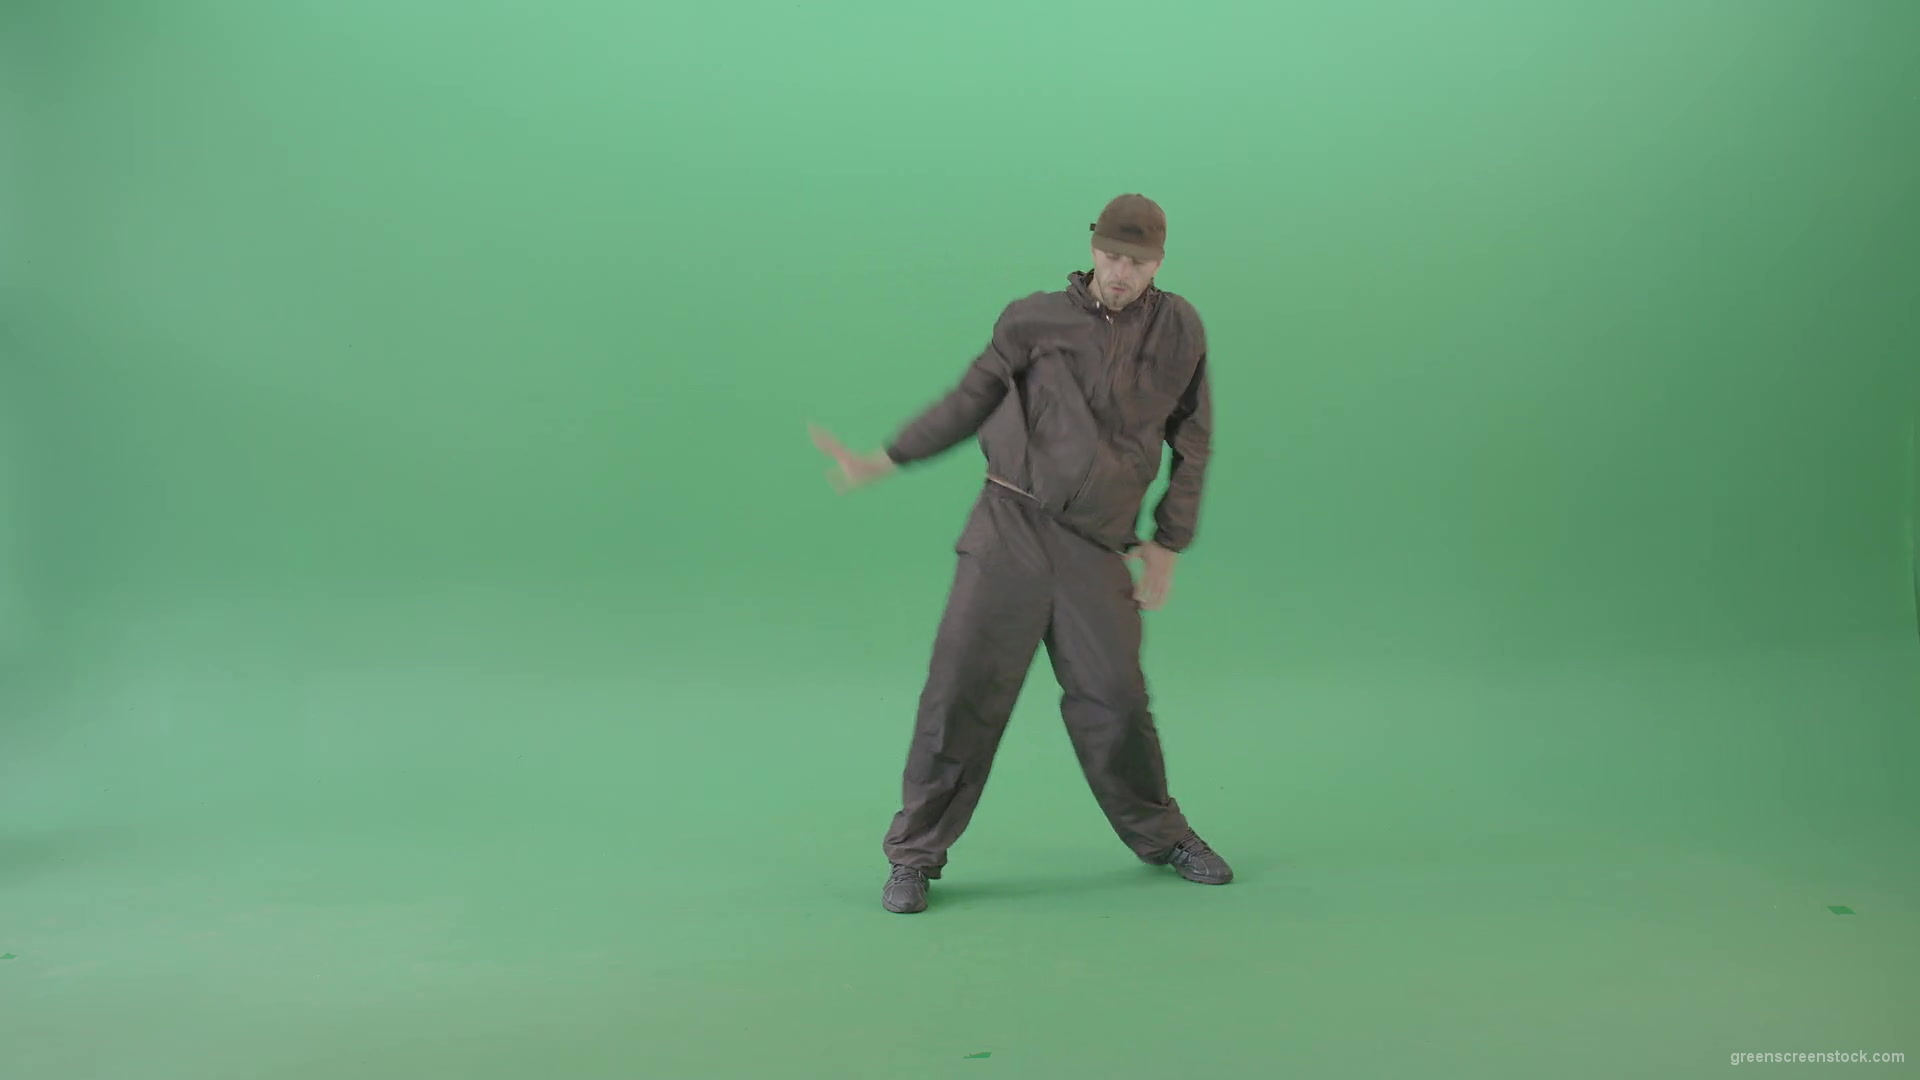 Top-Break-dance-by-electric-boogie-hip-hop-dancer-isolated-on-green-screen-4K-Video-Footage-1920_006 Green Screen Stock